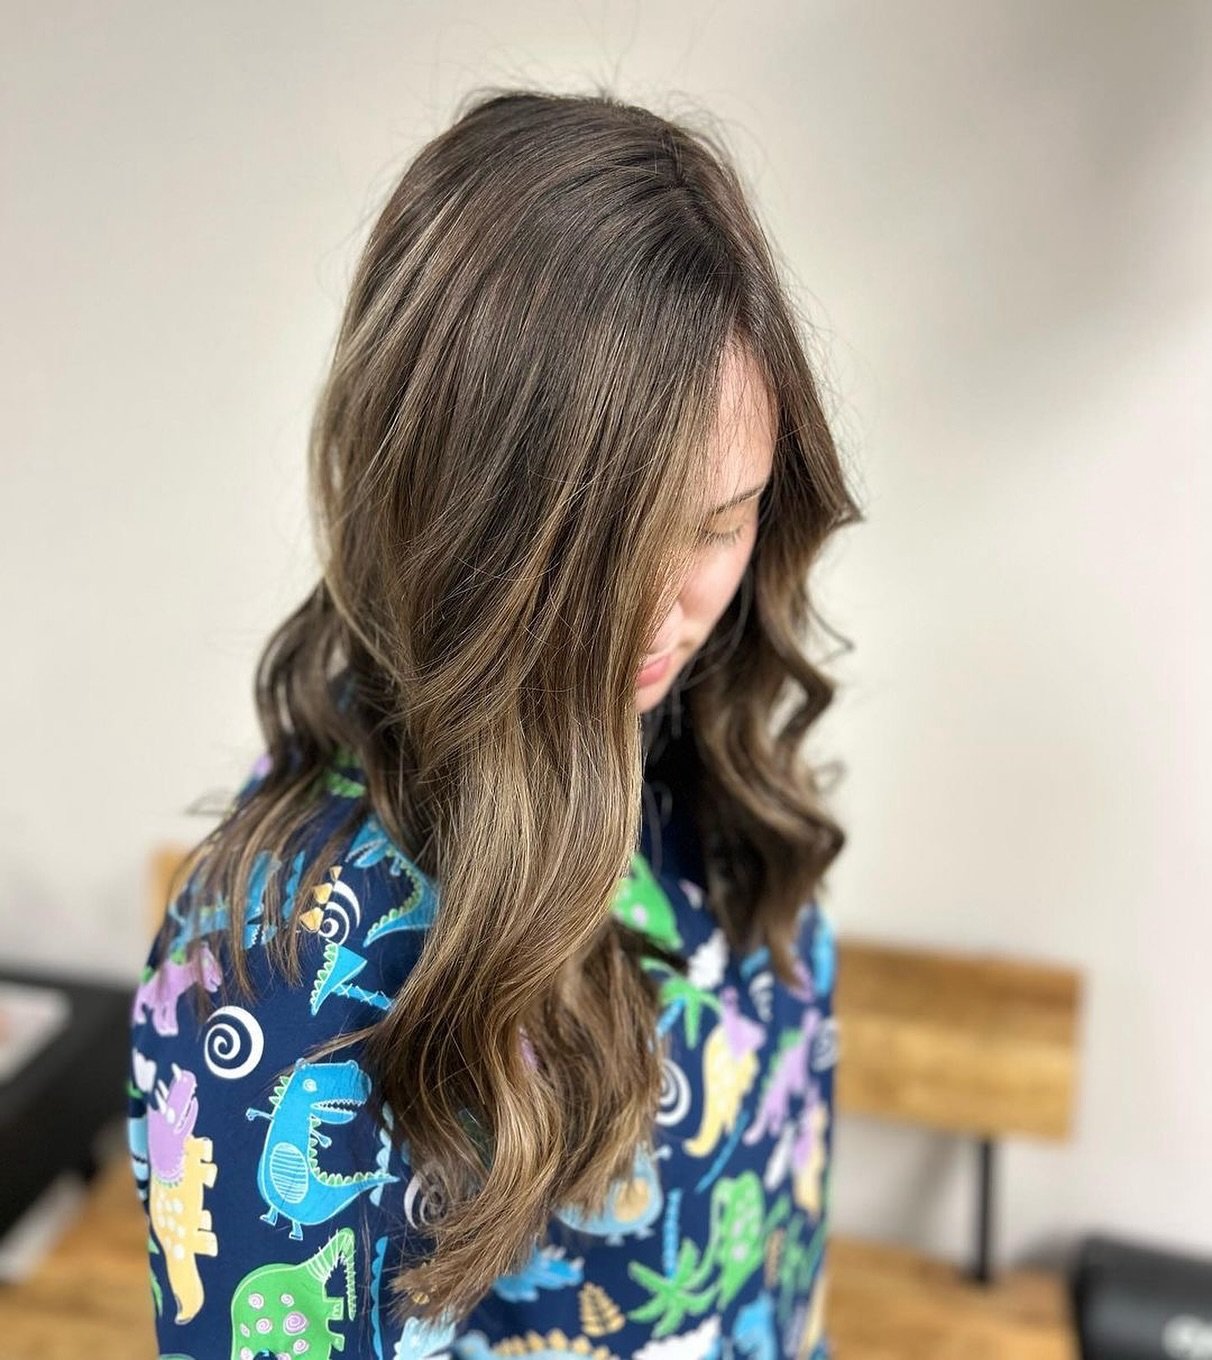 Rachel took this gal from an all over high-lite to this rich natural lived in look. She can now extend her time between appointments and still see dimension. 

@5thavenuesalonhvl
@racheldrake_hvl 
#hendersonvillenc #hendersonvillencstylist #flatrockn